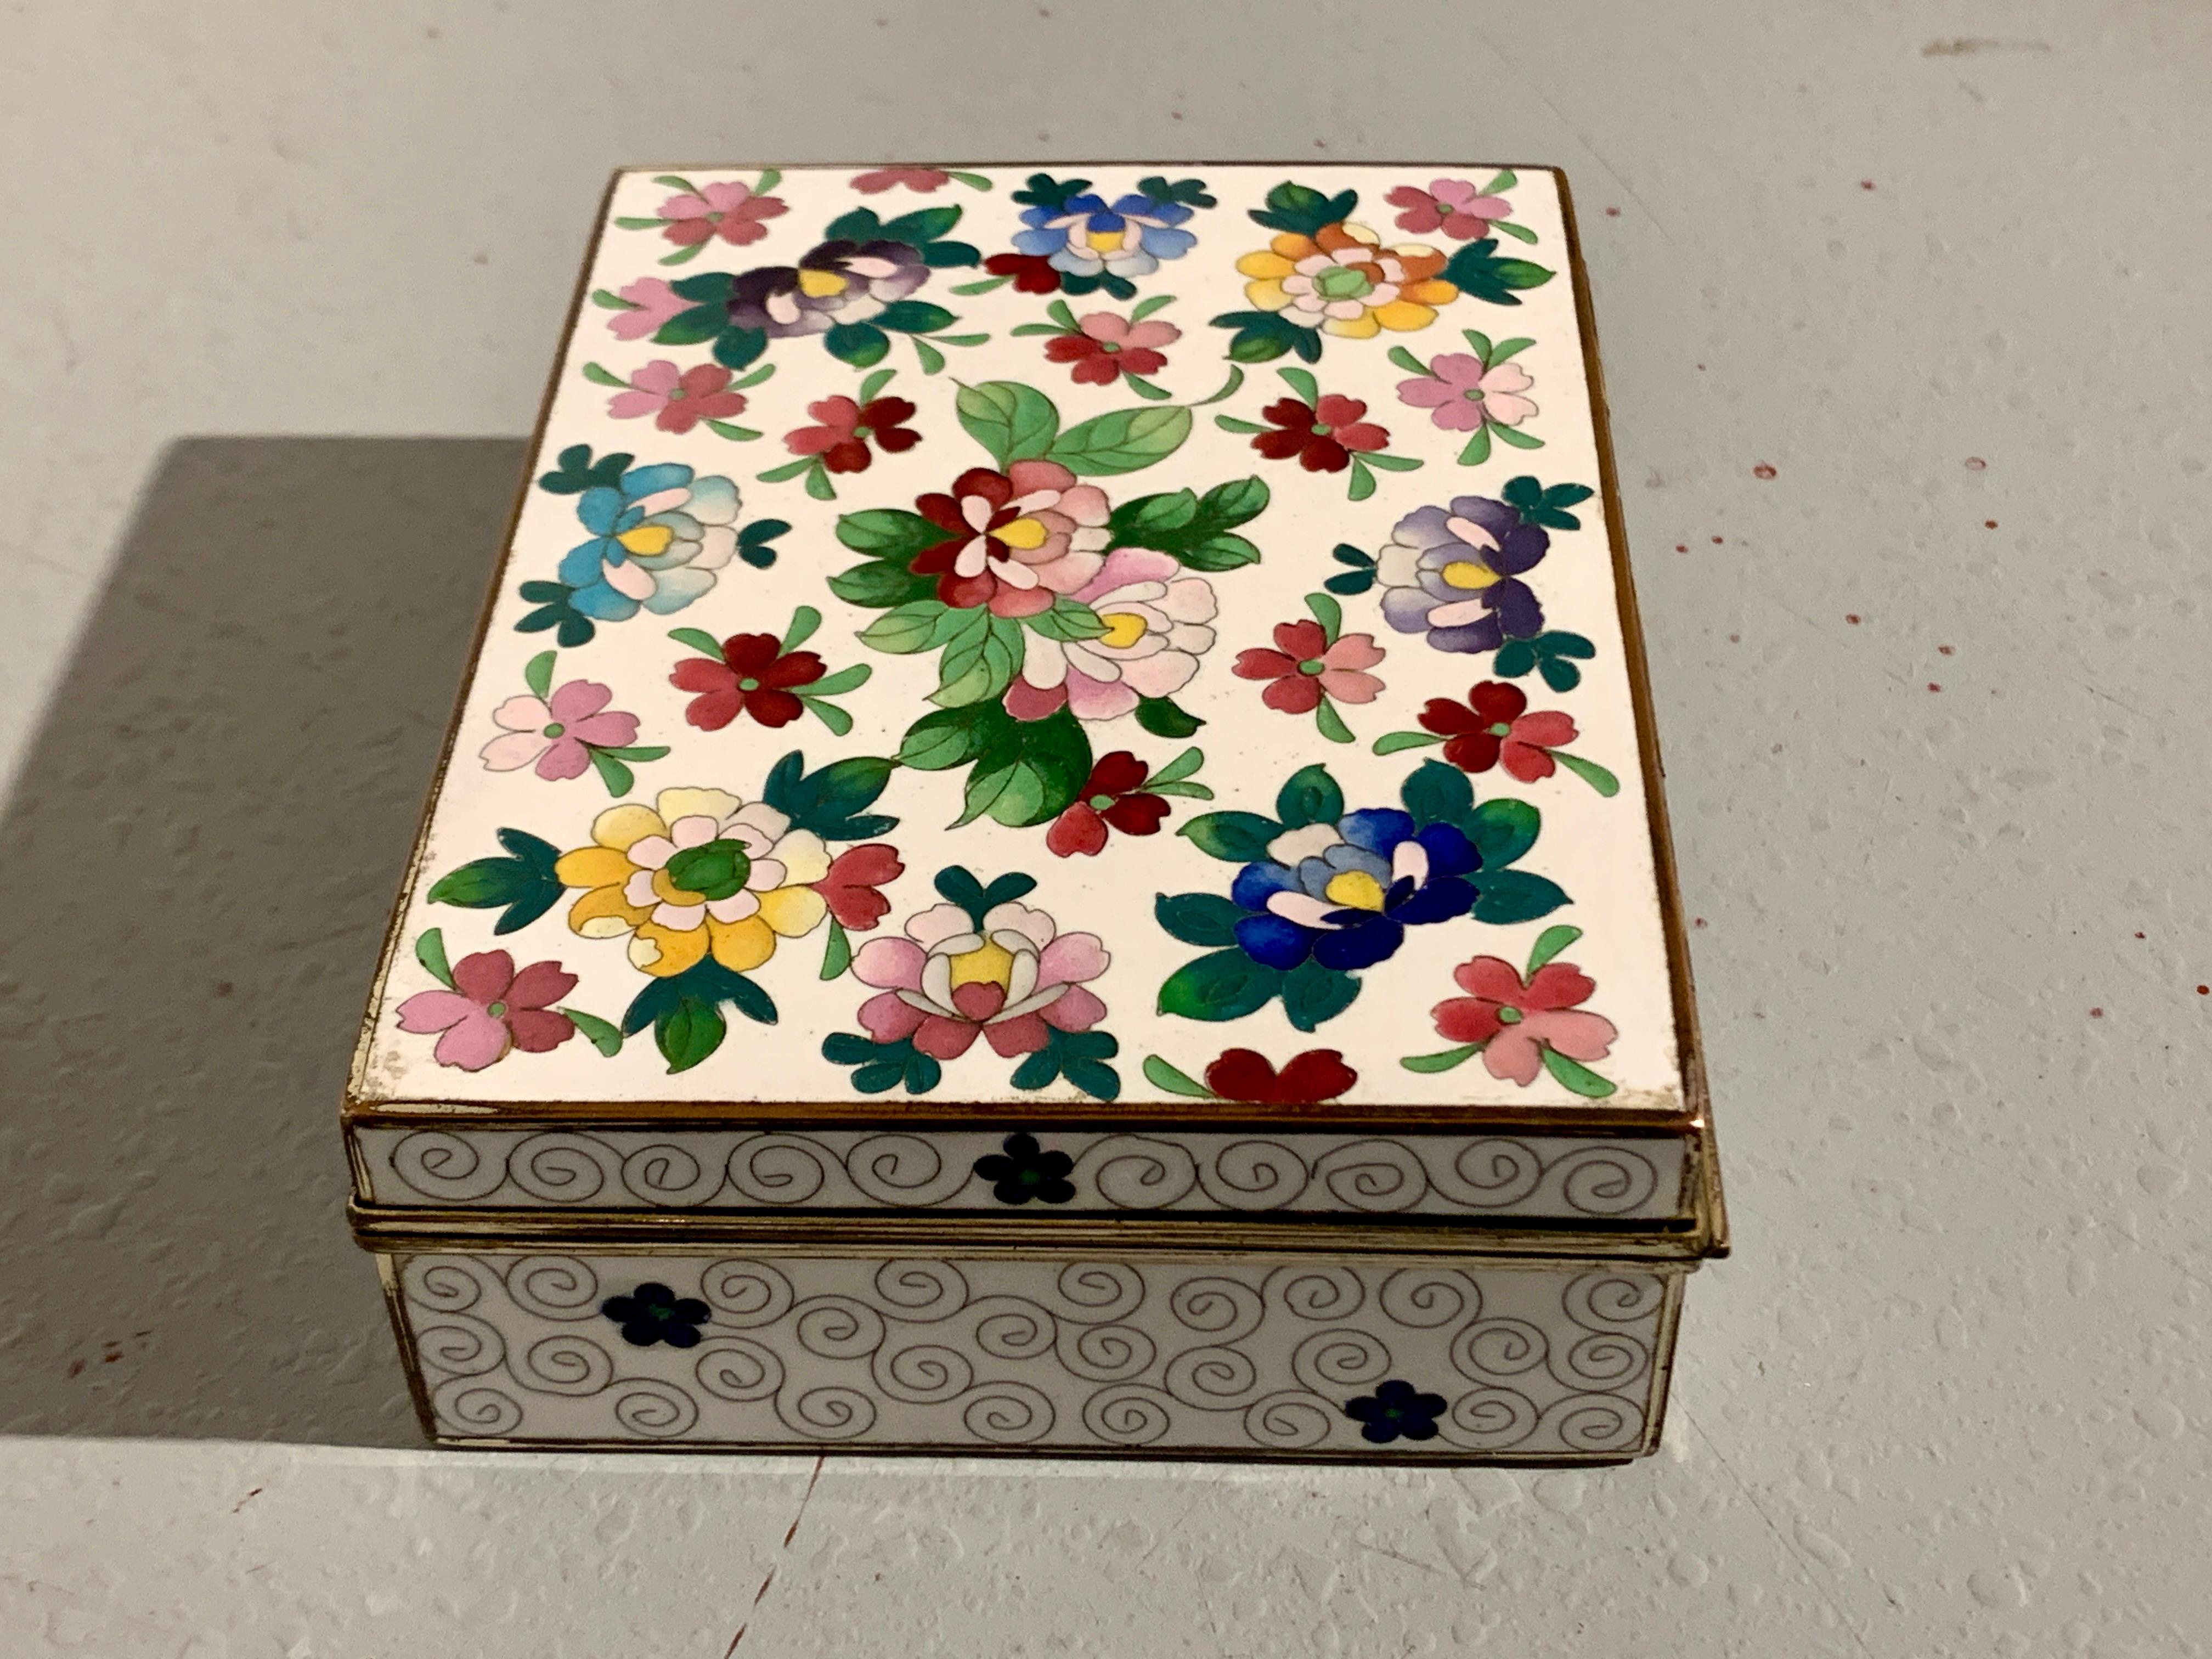 A delightful Japanese white ground cloisonne box, Showa Era, circa 1930's, Japan.

The trinket or keepsake box with a fanciful floral design to the hinged top. The flowers in shades of blues, plurals, reds, yellow, and pinks surrounded by green